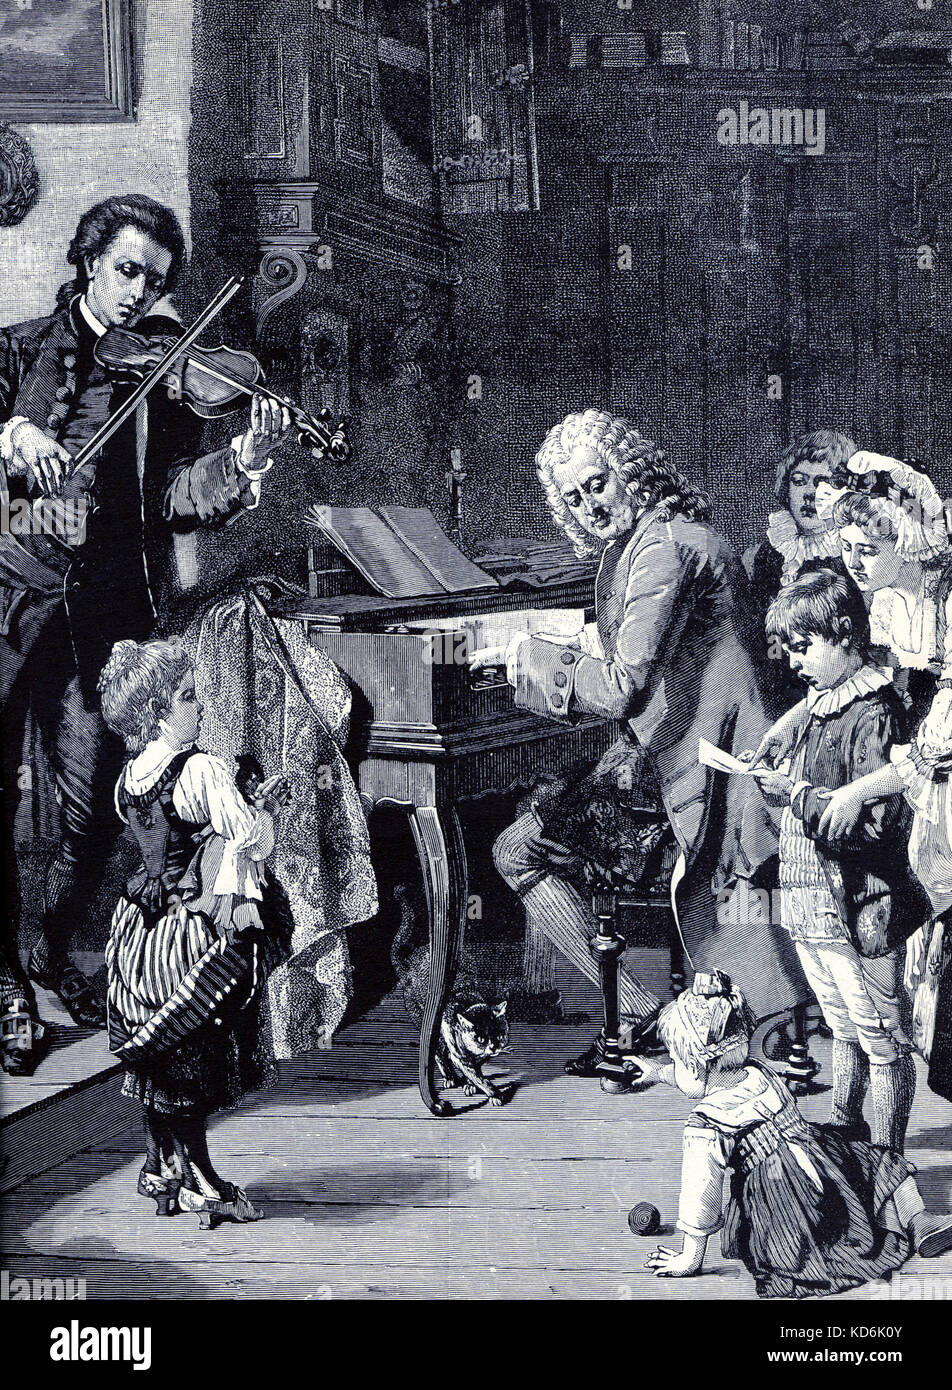 Johann Sebastian Bach at the clavichord, with his family. Woodcut. Detail from 'Morning prayer in Bach's home'. 1870 painting by Toby Edward Rosenthal, American painter (15 March 1848 – 23 December 1917). Leipzig Museum. One of Bach's sons at the violin and another one singing.  German composer & organist, 1685-1750. Stock Photo